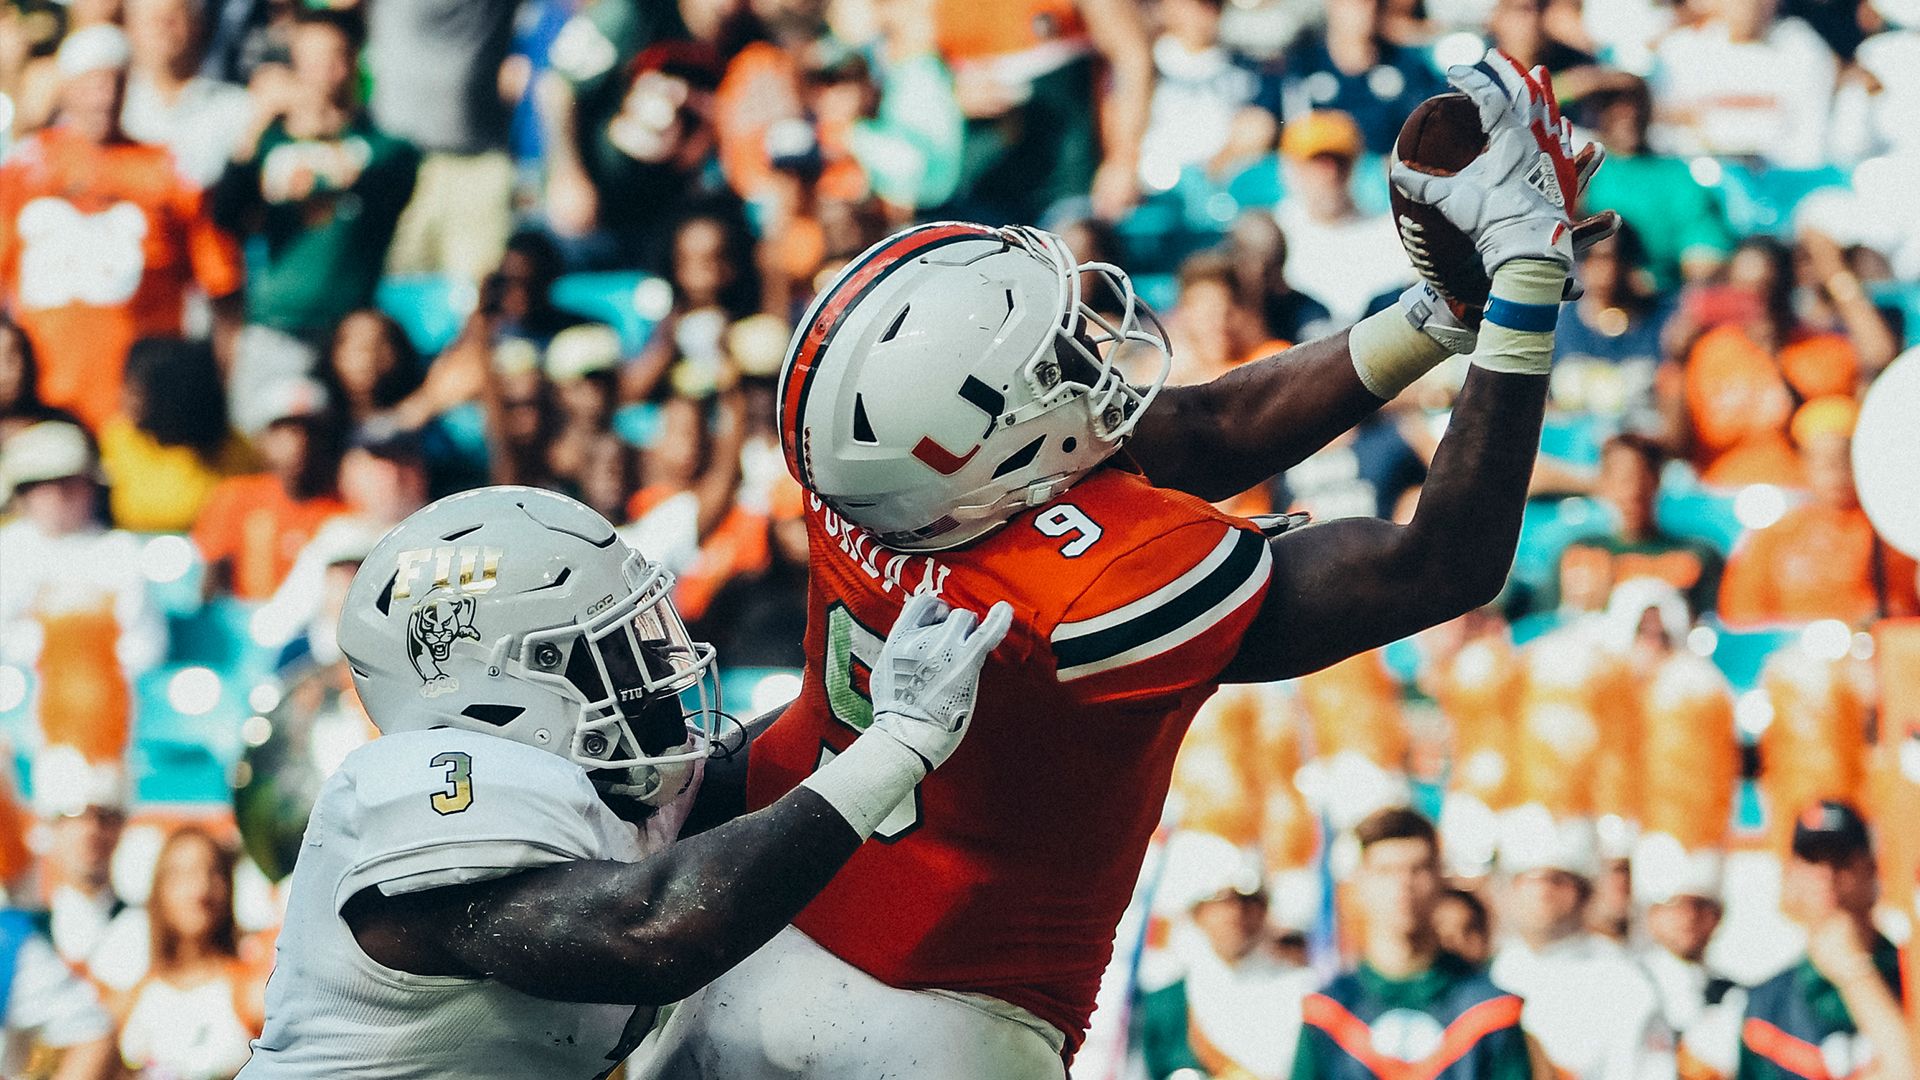 Canes' Offense Eager to Perform at Boston College